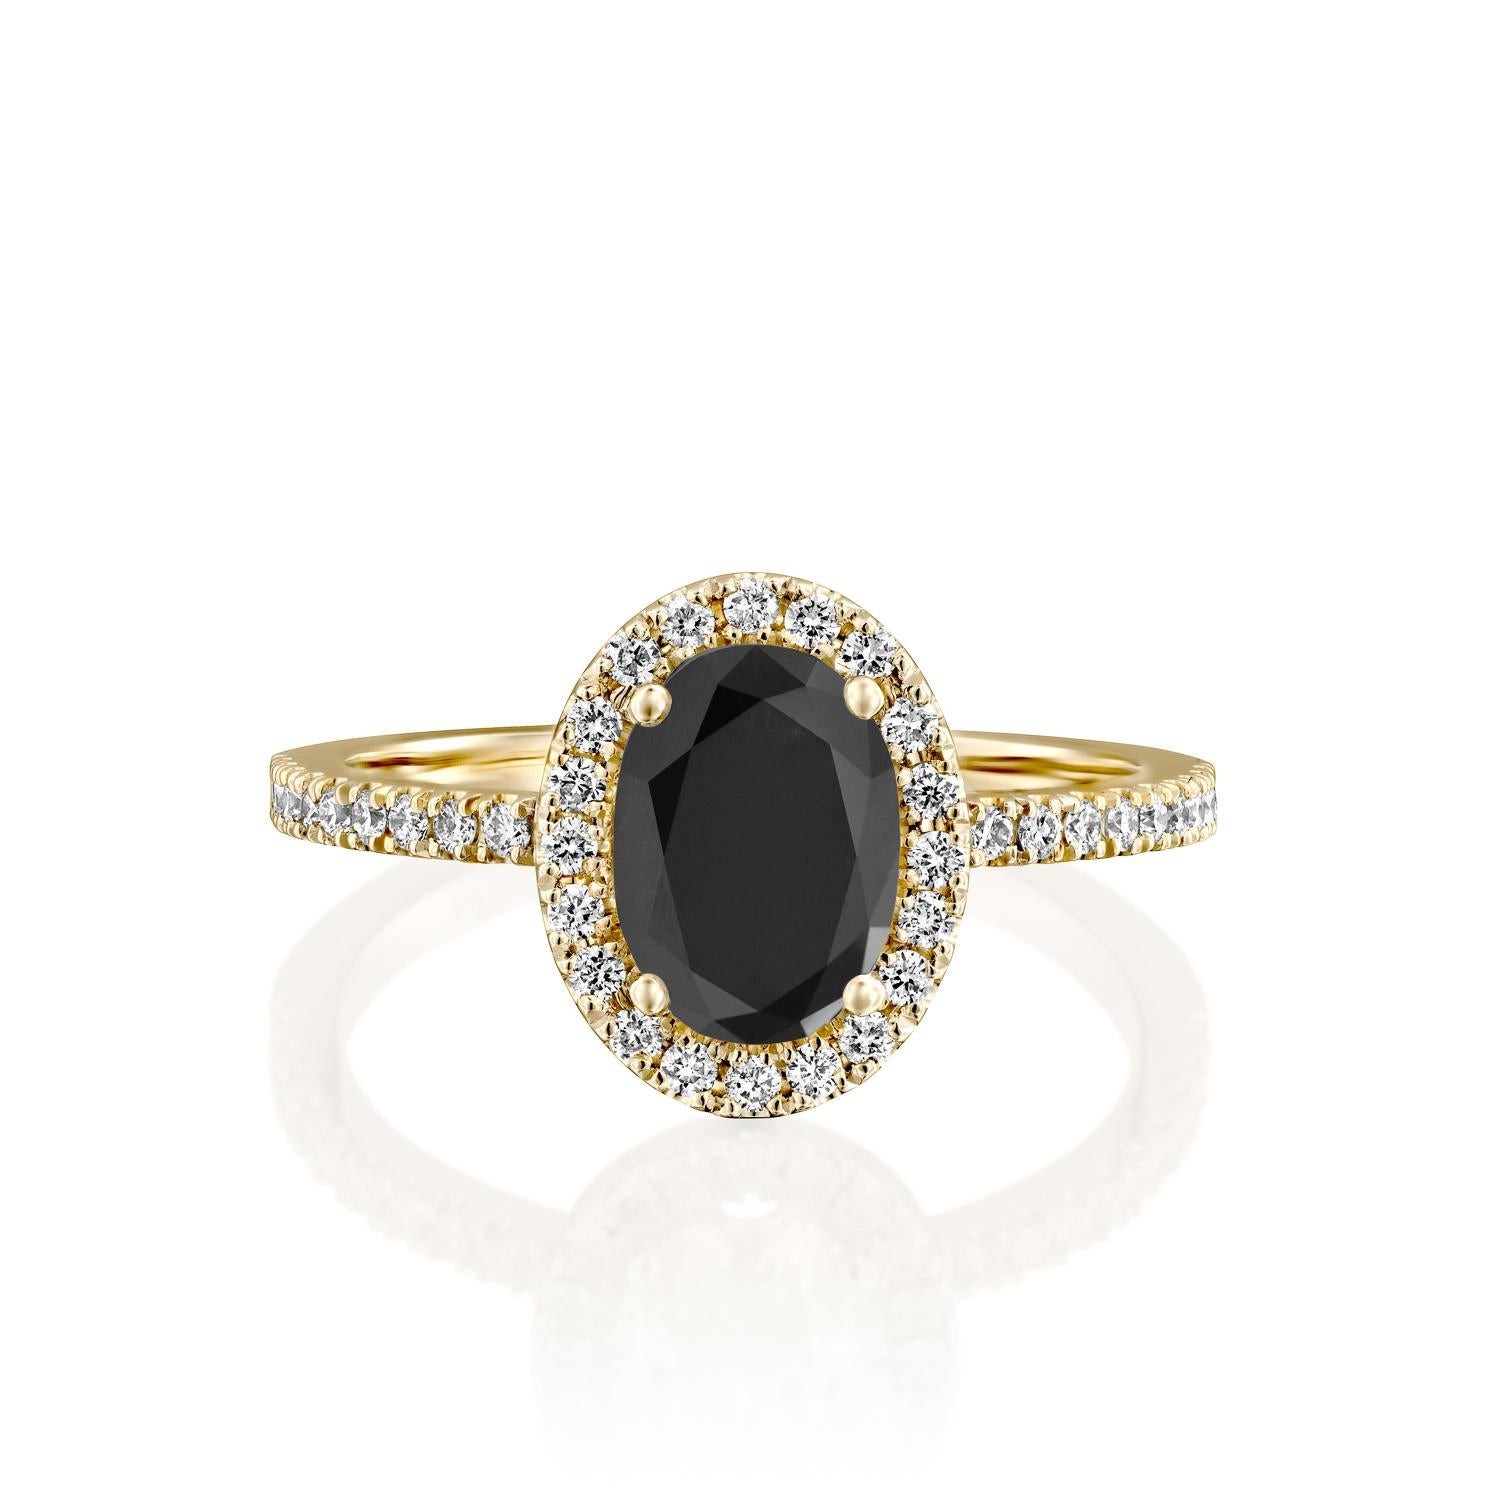 Beautiful solitaire with accents vintage style diamond engagement ring. Center stone is natural, oval shaped, AAA quality Black Diamond of 1 carat and it is surrounded by smaller natural diamonds approx. 0.5 total carat weight. The total carat